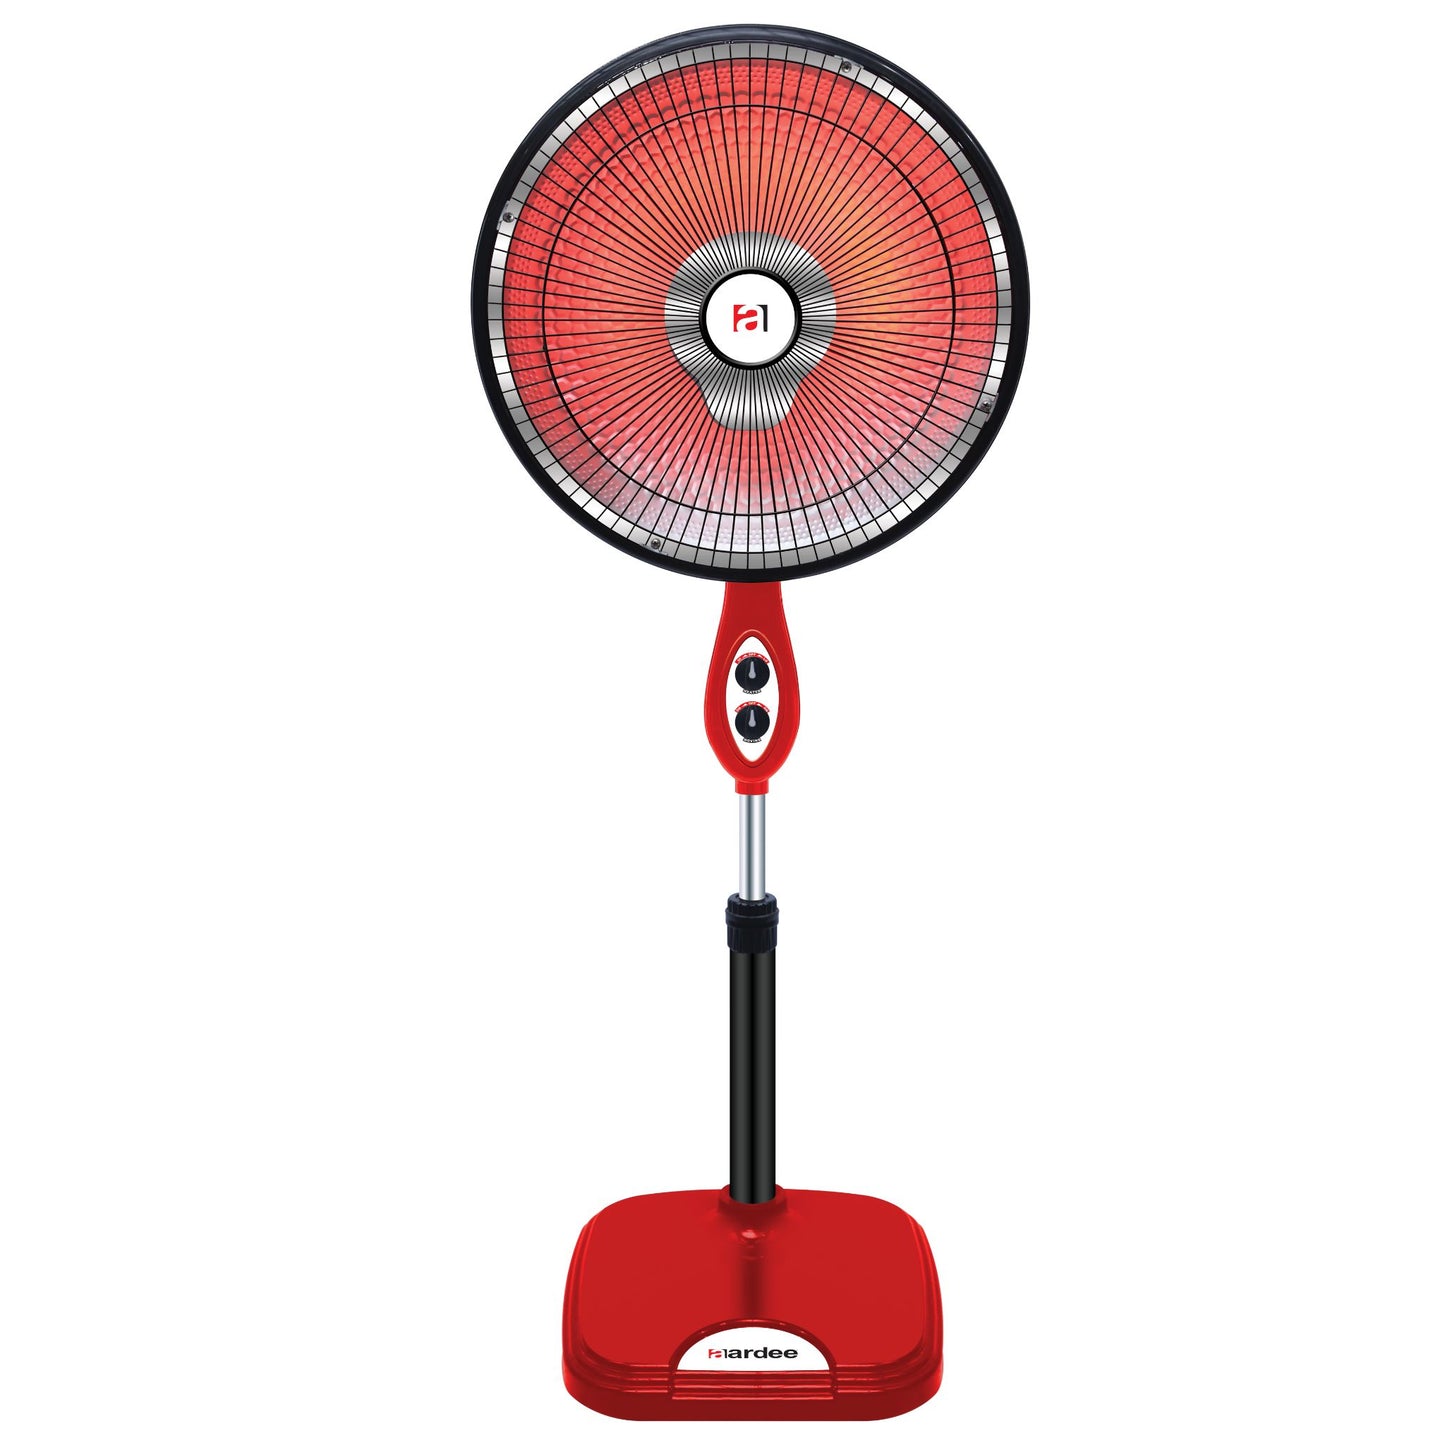 2 Heat Setting Infrared Heater with Adjustable Height - ARIFRH-1000